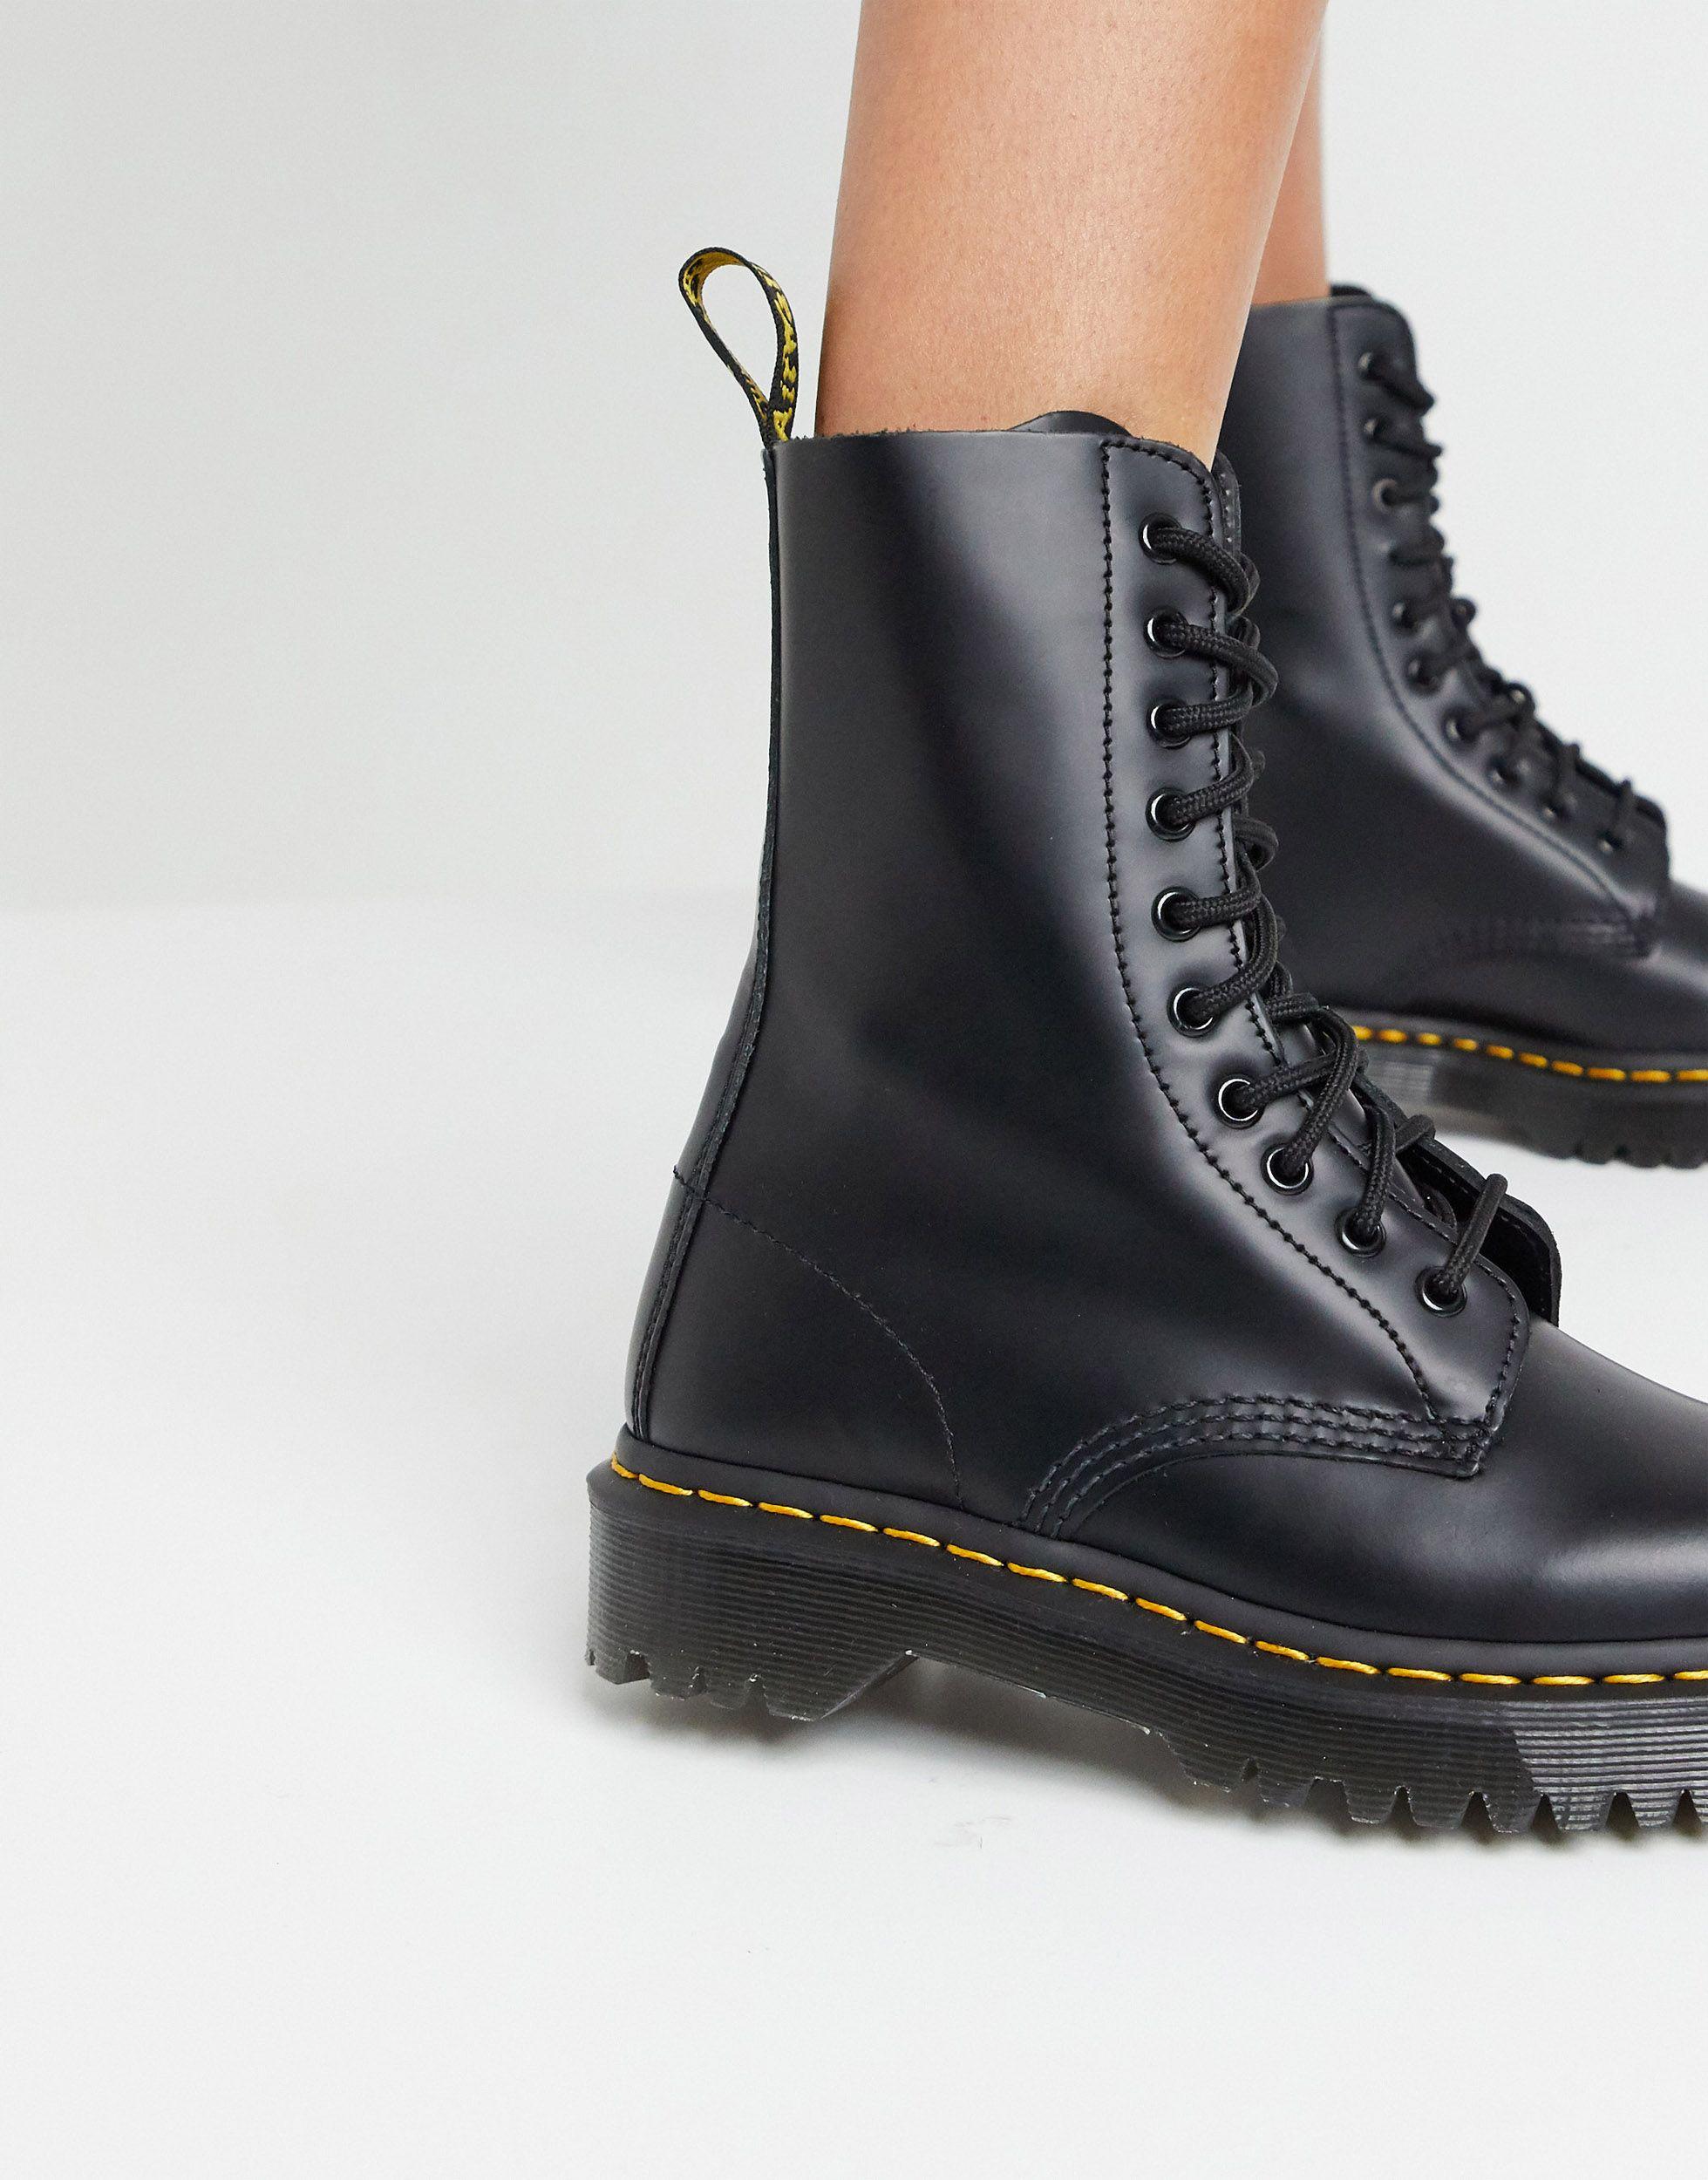 Dr. Martens Leather 1490 10 Eye Bex Boots in Black - Lyst